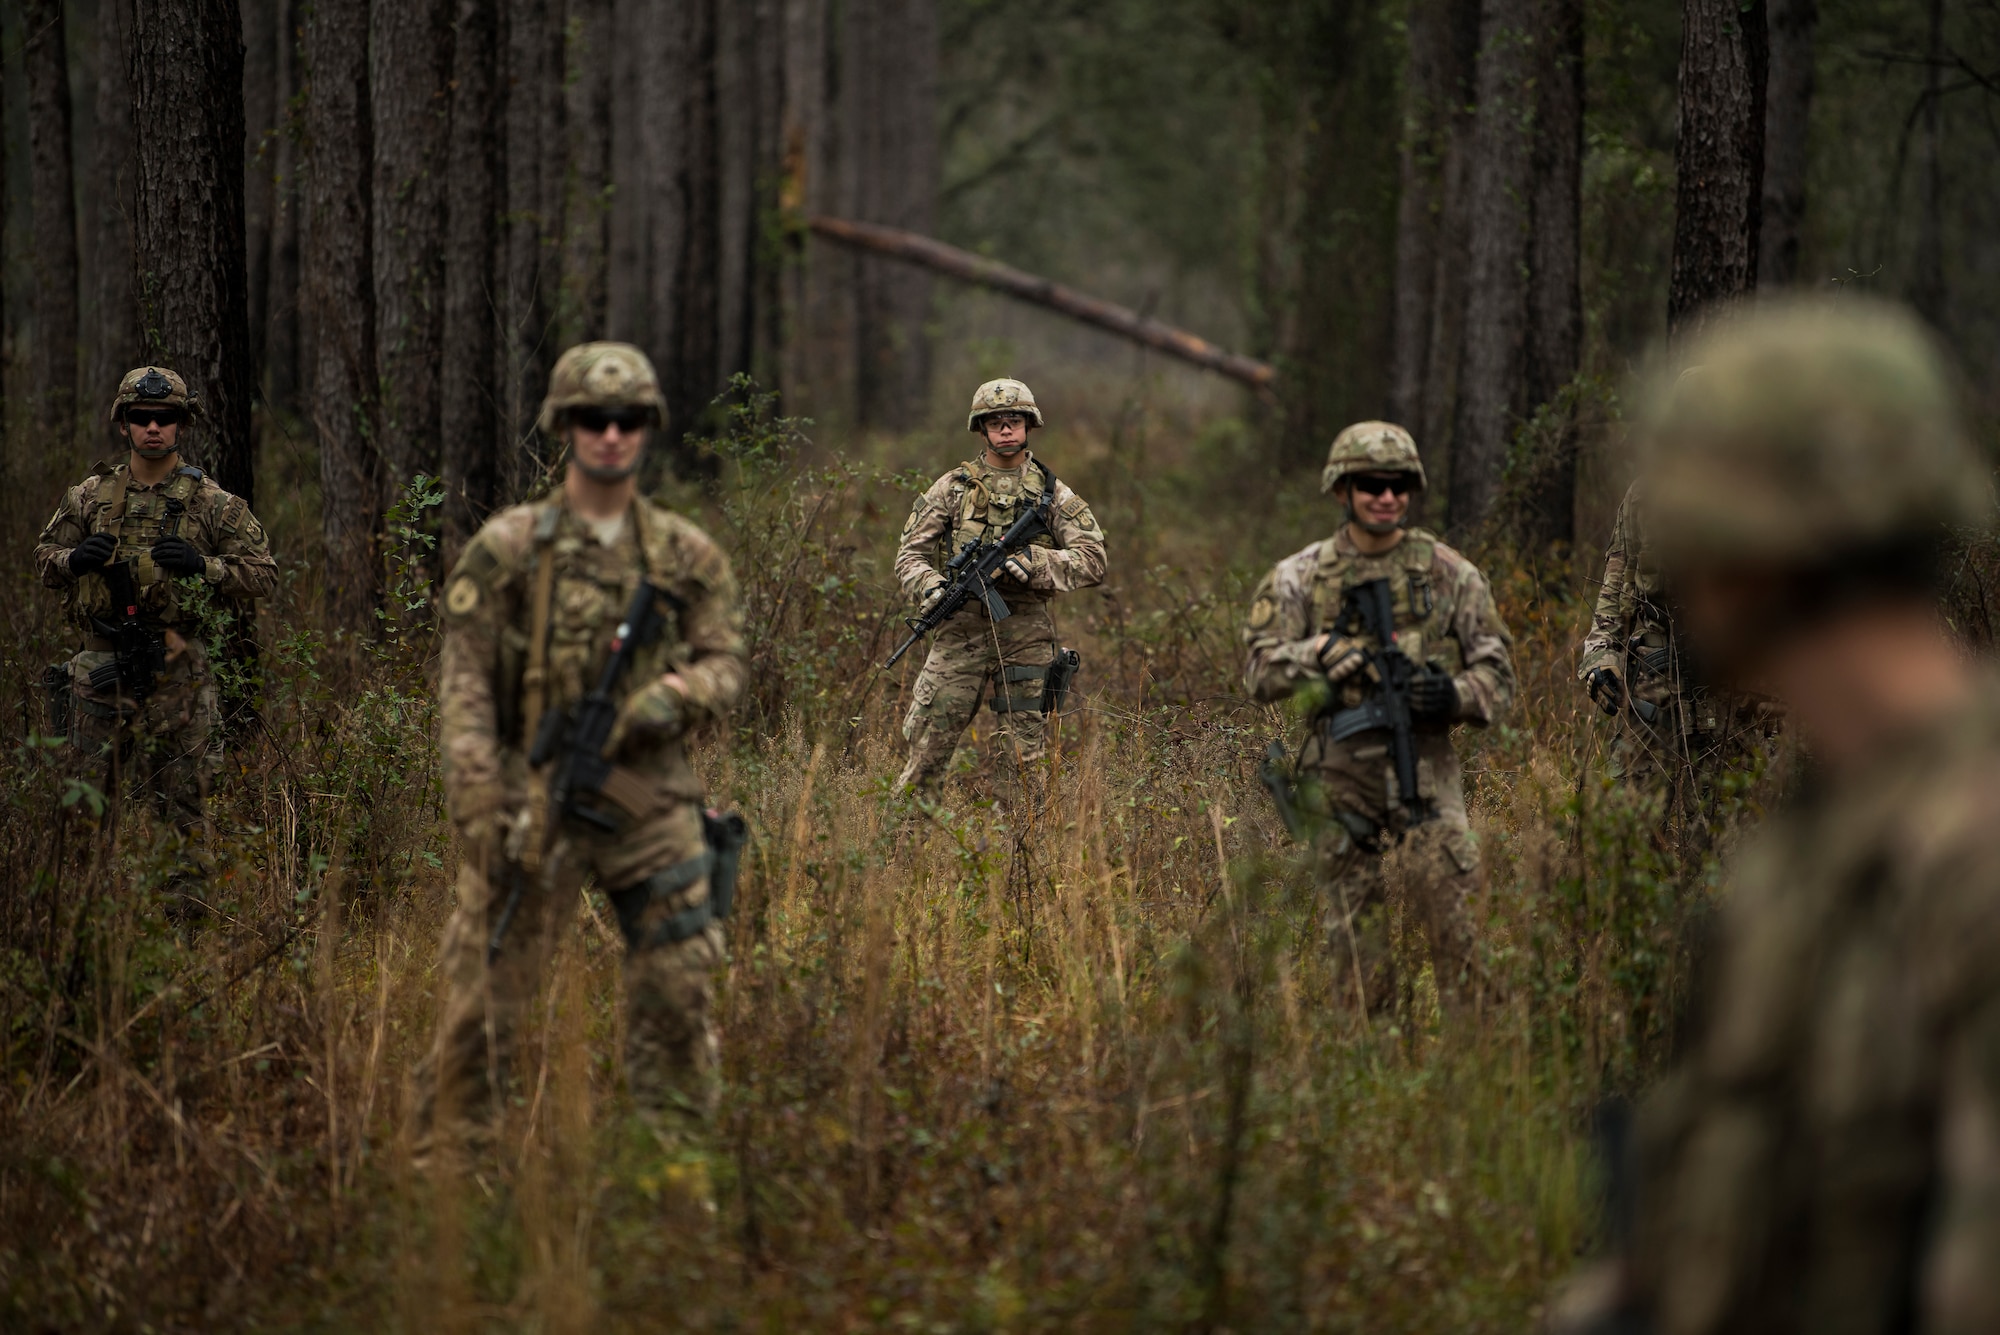 Members of the 823rd Base Defense Squadron for enemy forces during a training scenario, Moody Air Force Base, Jan. 12, 2018. The 823rd is one of three operational security forces squadrons under the 820th Base Defense Group whose mission is to provide high-risk force protection and integrated base defense for expeditionary forces. (U.S. Air Force photo by Bennie J. Davis III)